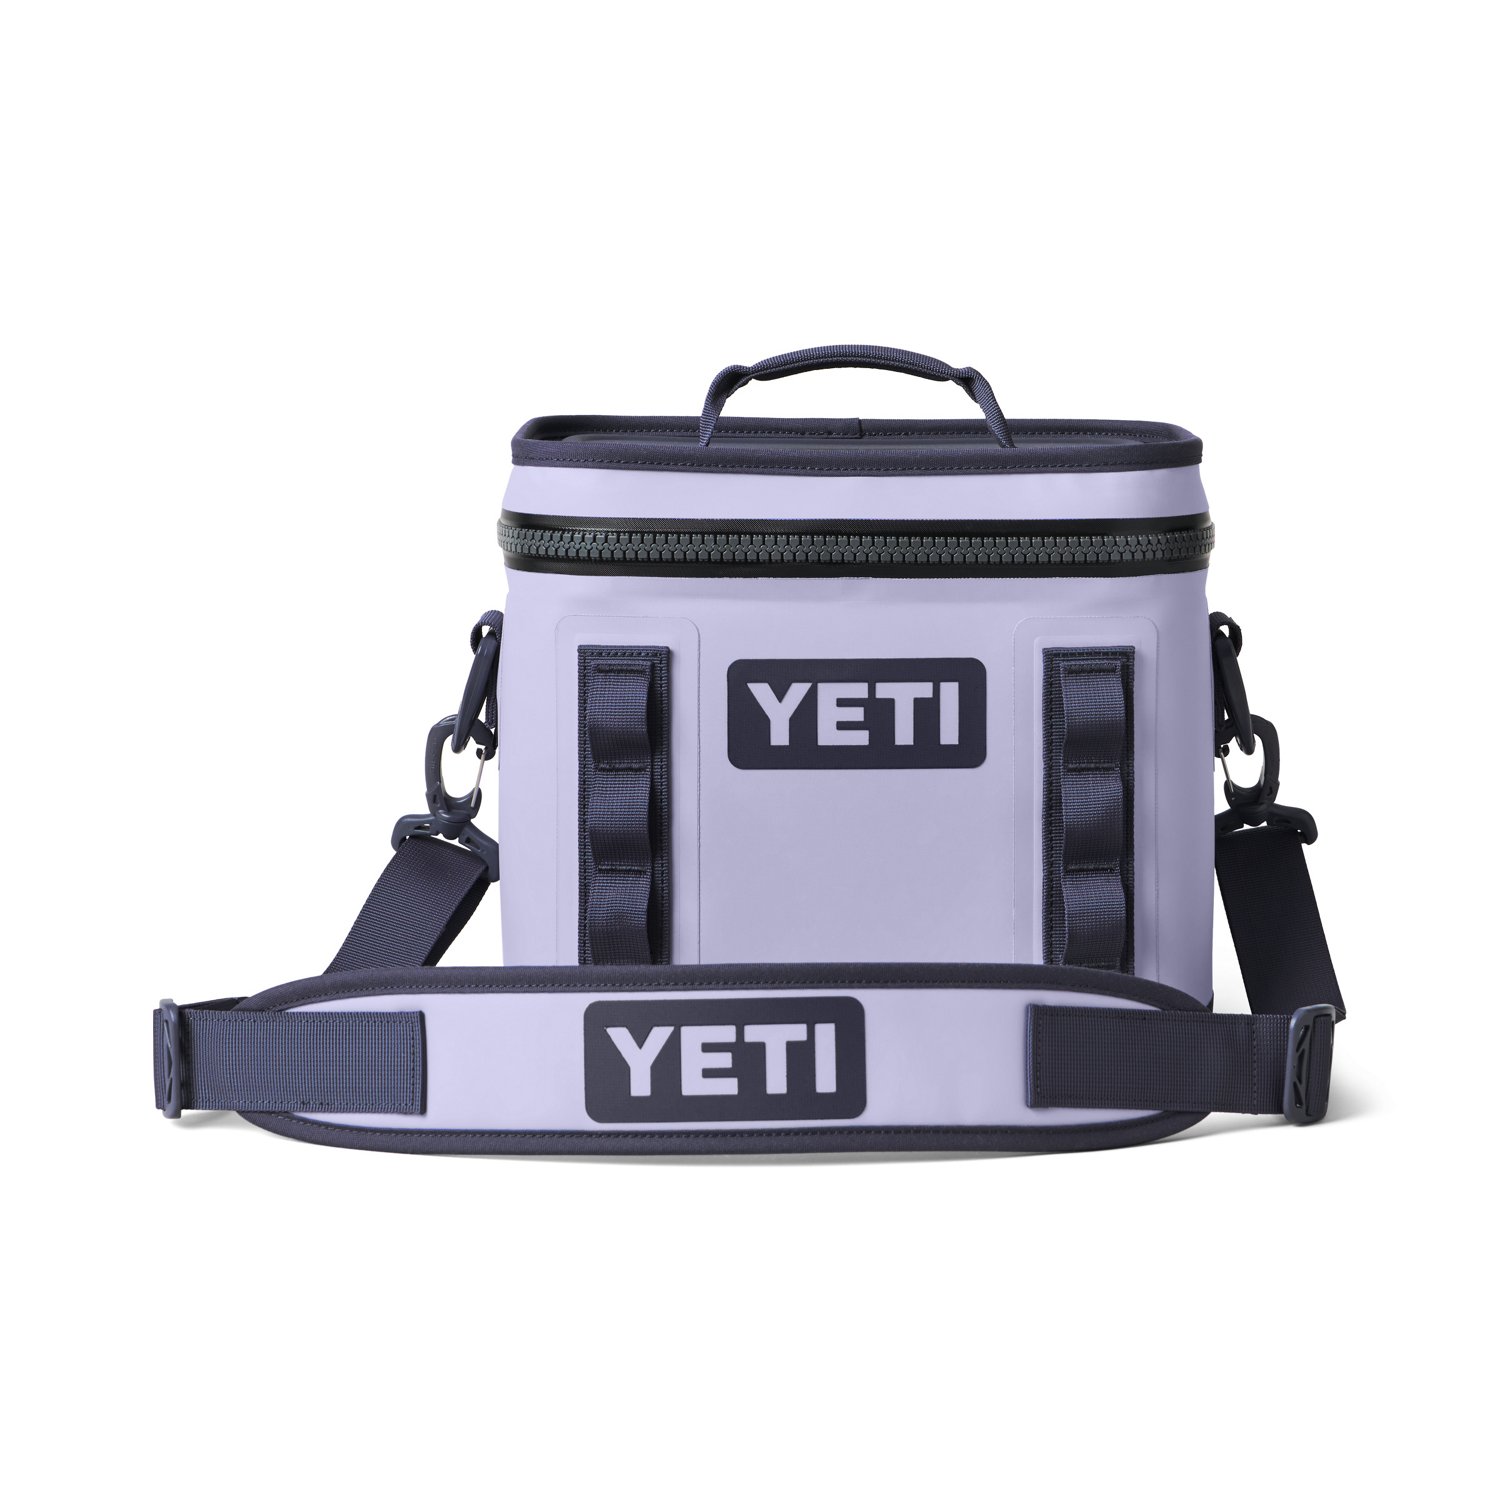 https://academy.scene7.com/is/image/academy//coolers/yeti-hopper-flip-8-soft-cooler-18060131200-purple/2120063e76af4e3d9ad148a150c1a5fe?$pdp-mobile-gallery-ng$